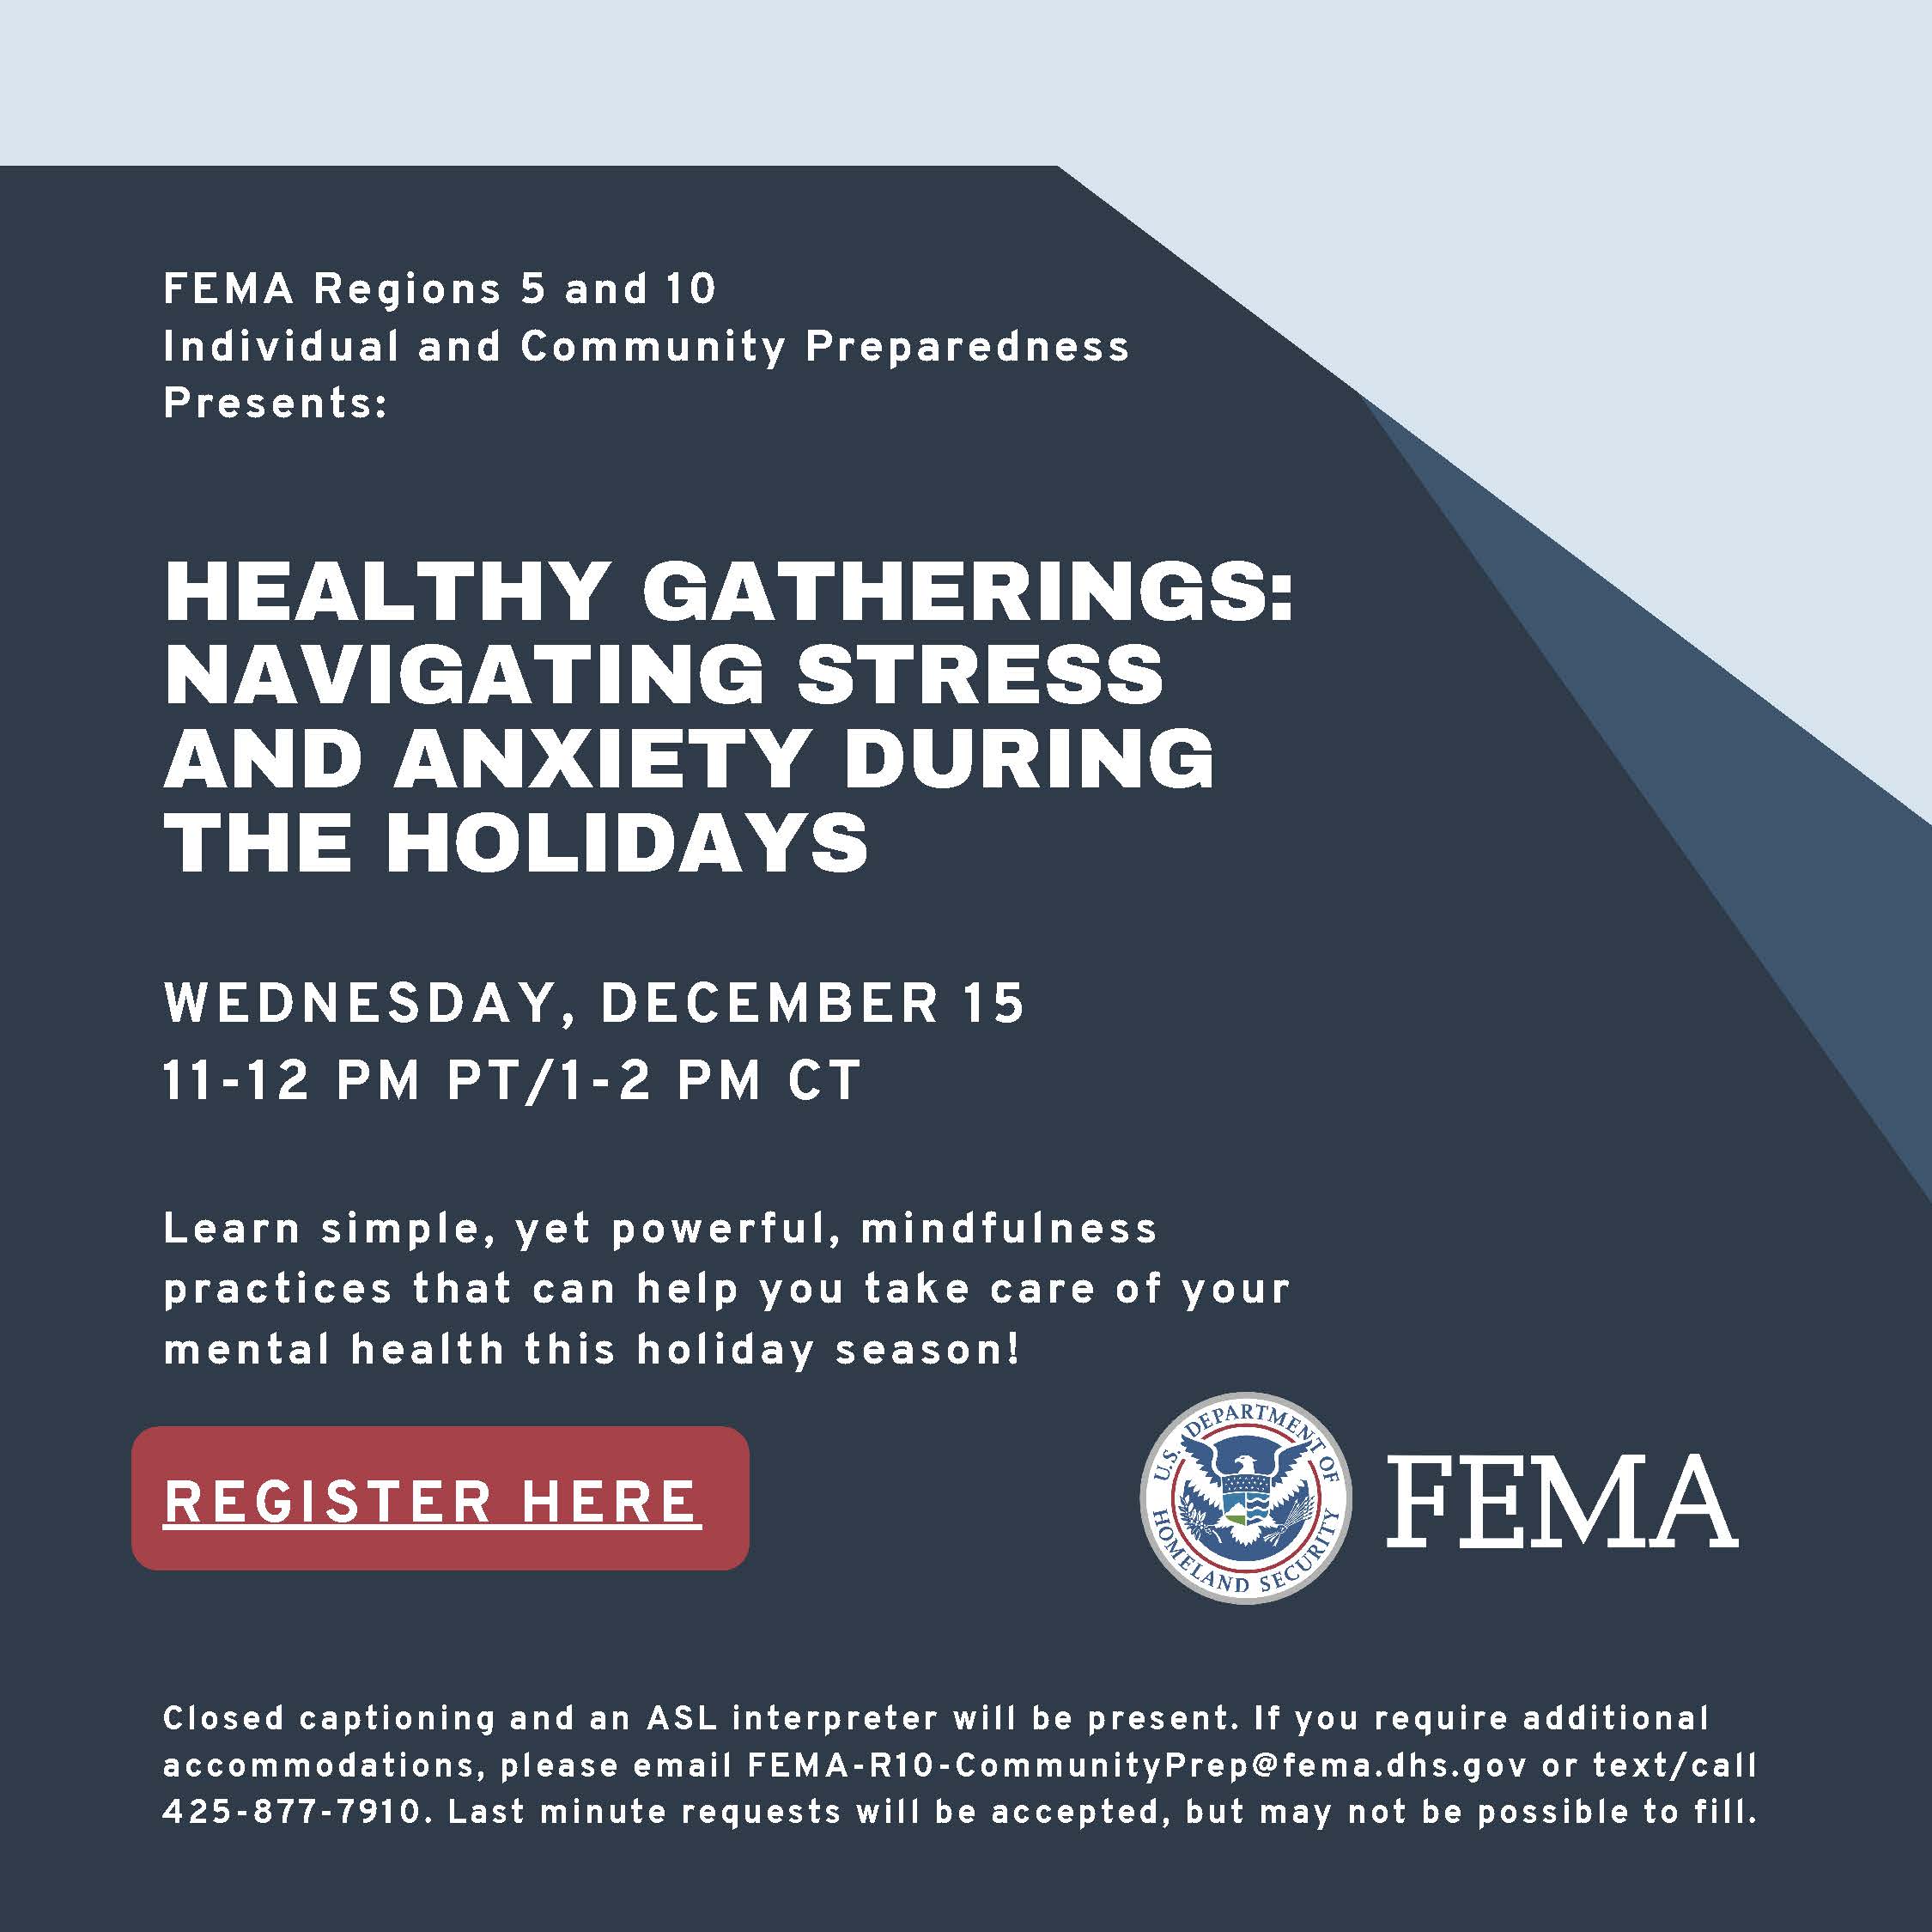 Text: FEMA Regions 5 and 10 Individual and Community Preparedness Presents: HEALTHY GATHERINGS: NAVIGATING STRESS AND ANXIETY DURING THE HOLIDAYS WEDNESDAY, DECEMBER 15 11-12 PM PT/1-2 PM CT Learn simple, yet powerful, mindfulness practices that can help you take care of your mental health this holiday season! Closed captioning and an ASL interpreter will be present. If you require additional accommodations, please email FEMA-R10-CommunityPrep@fema.dhs.gov or text/call 425-877-7910.